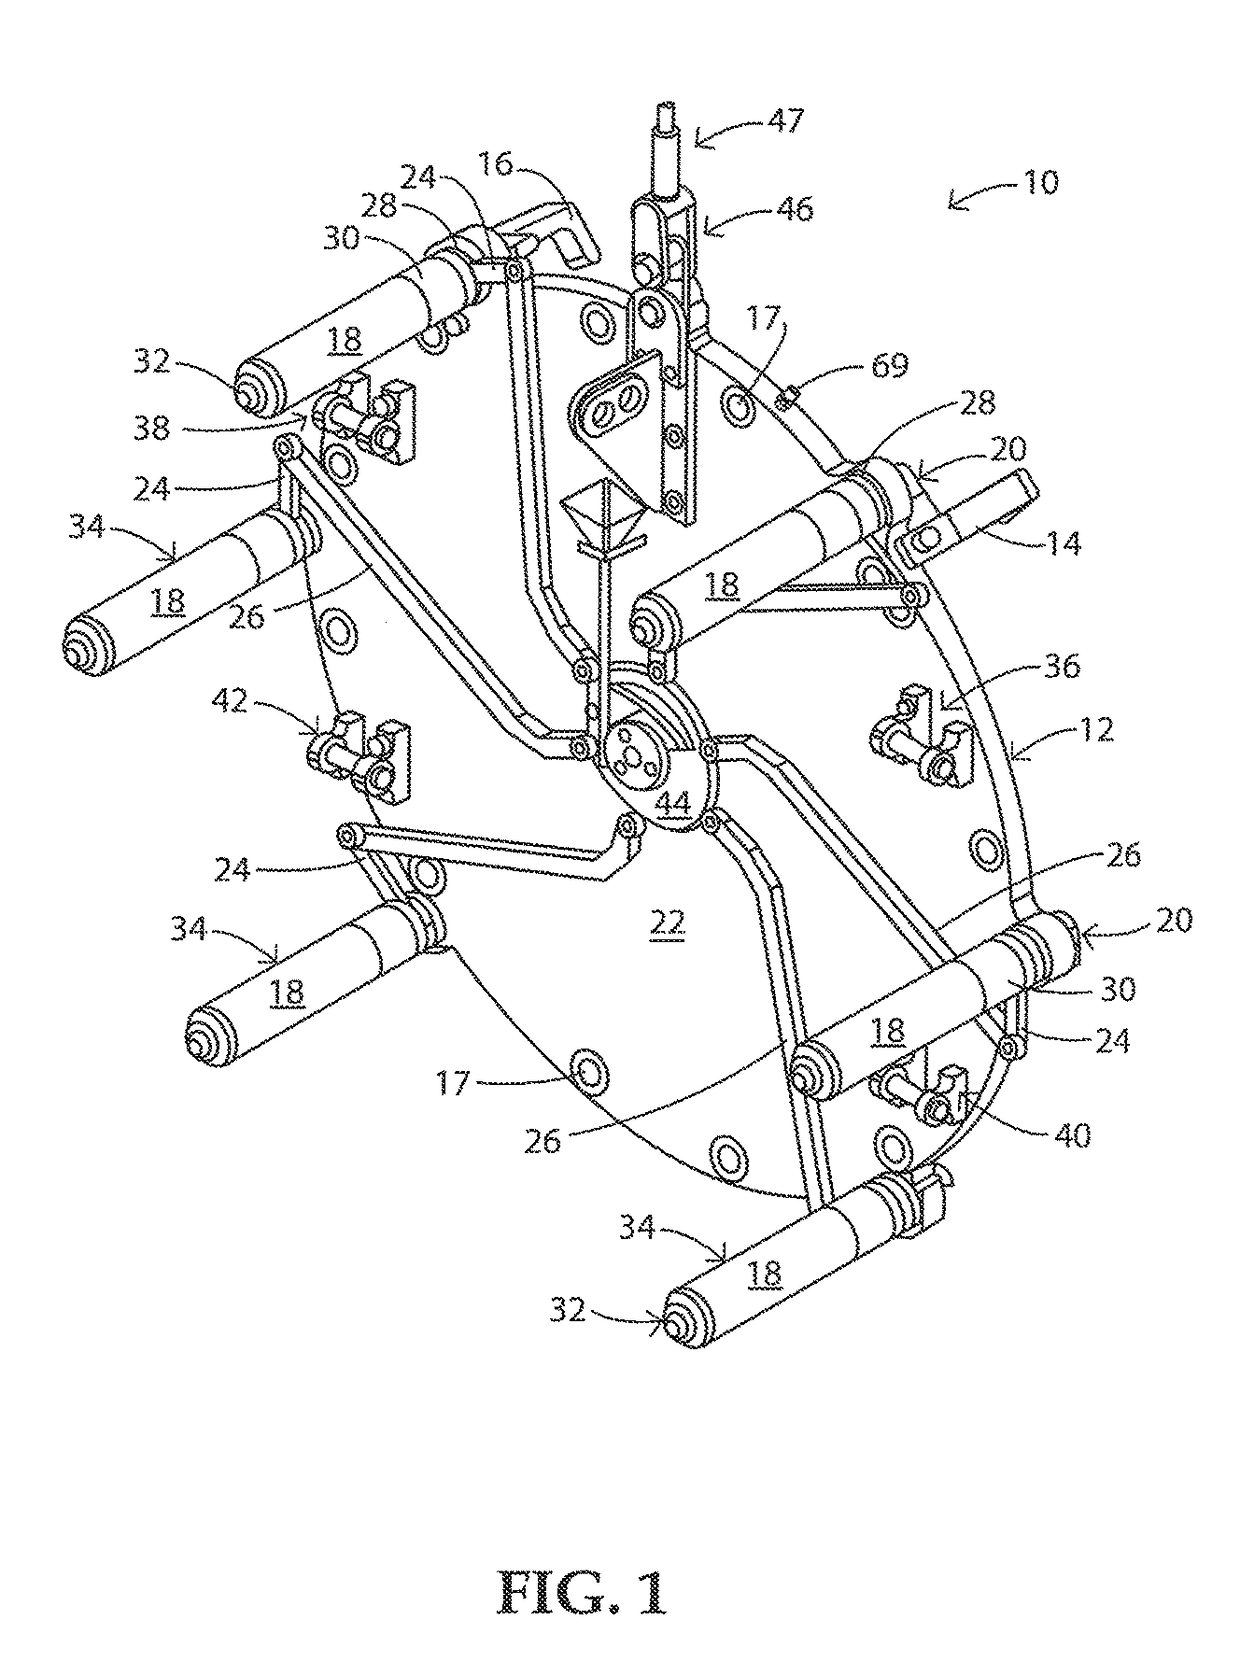 Remotely installed fuel transfer tube closure system